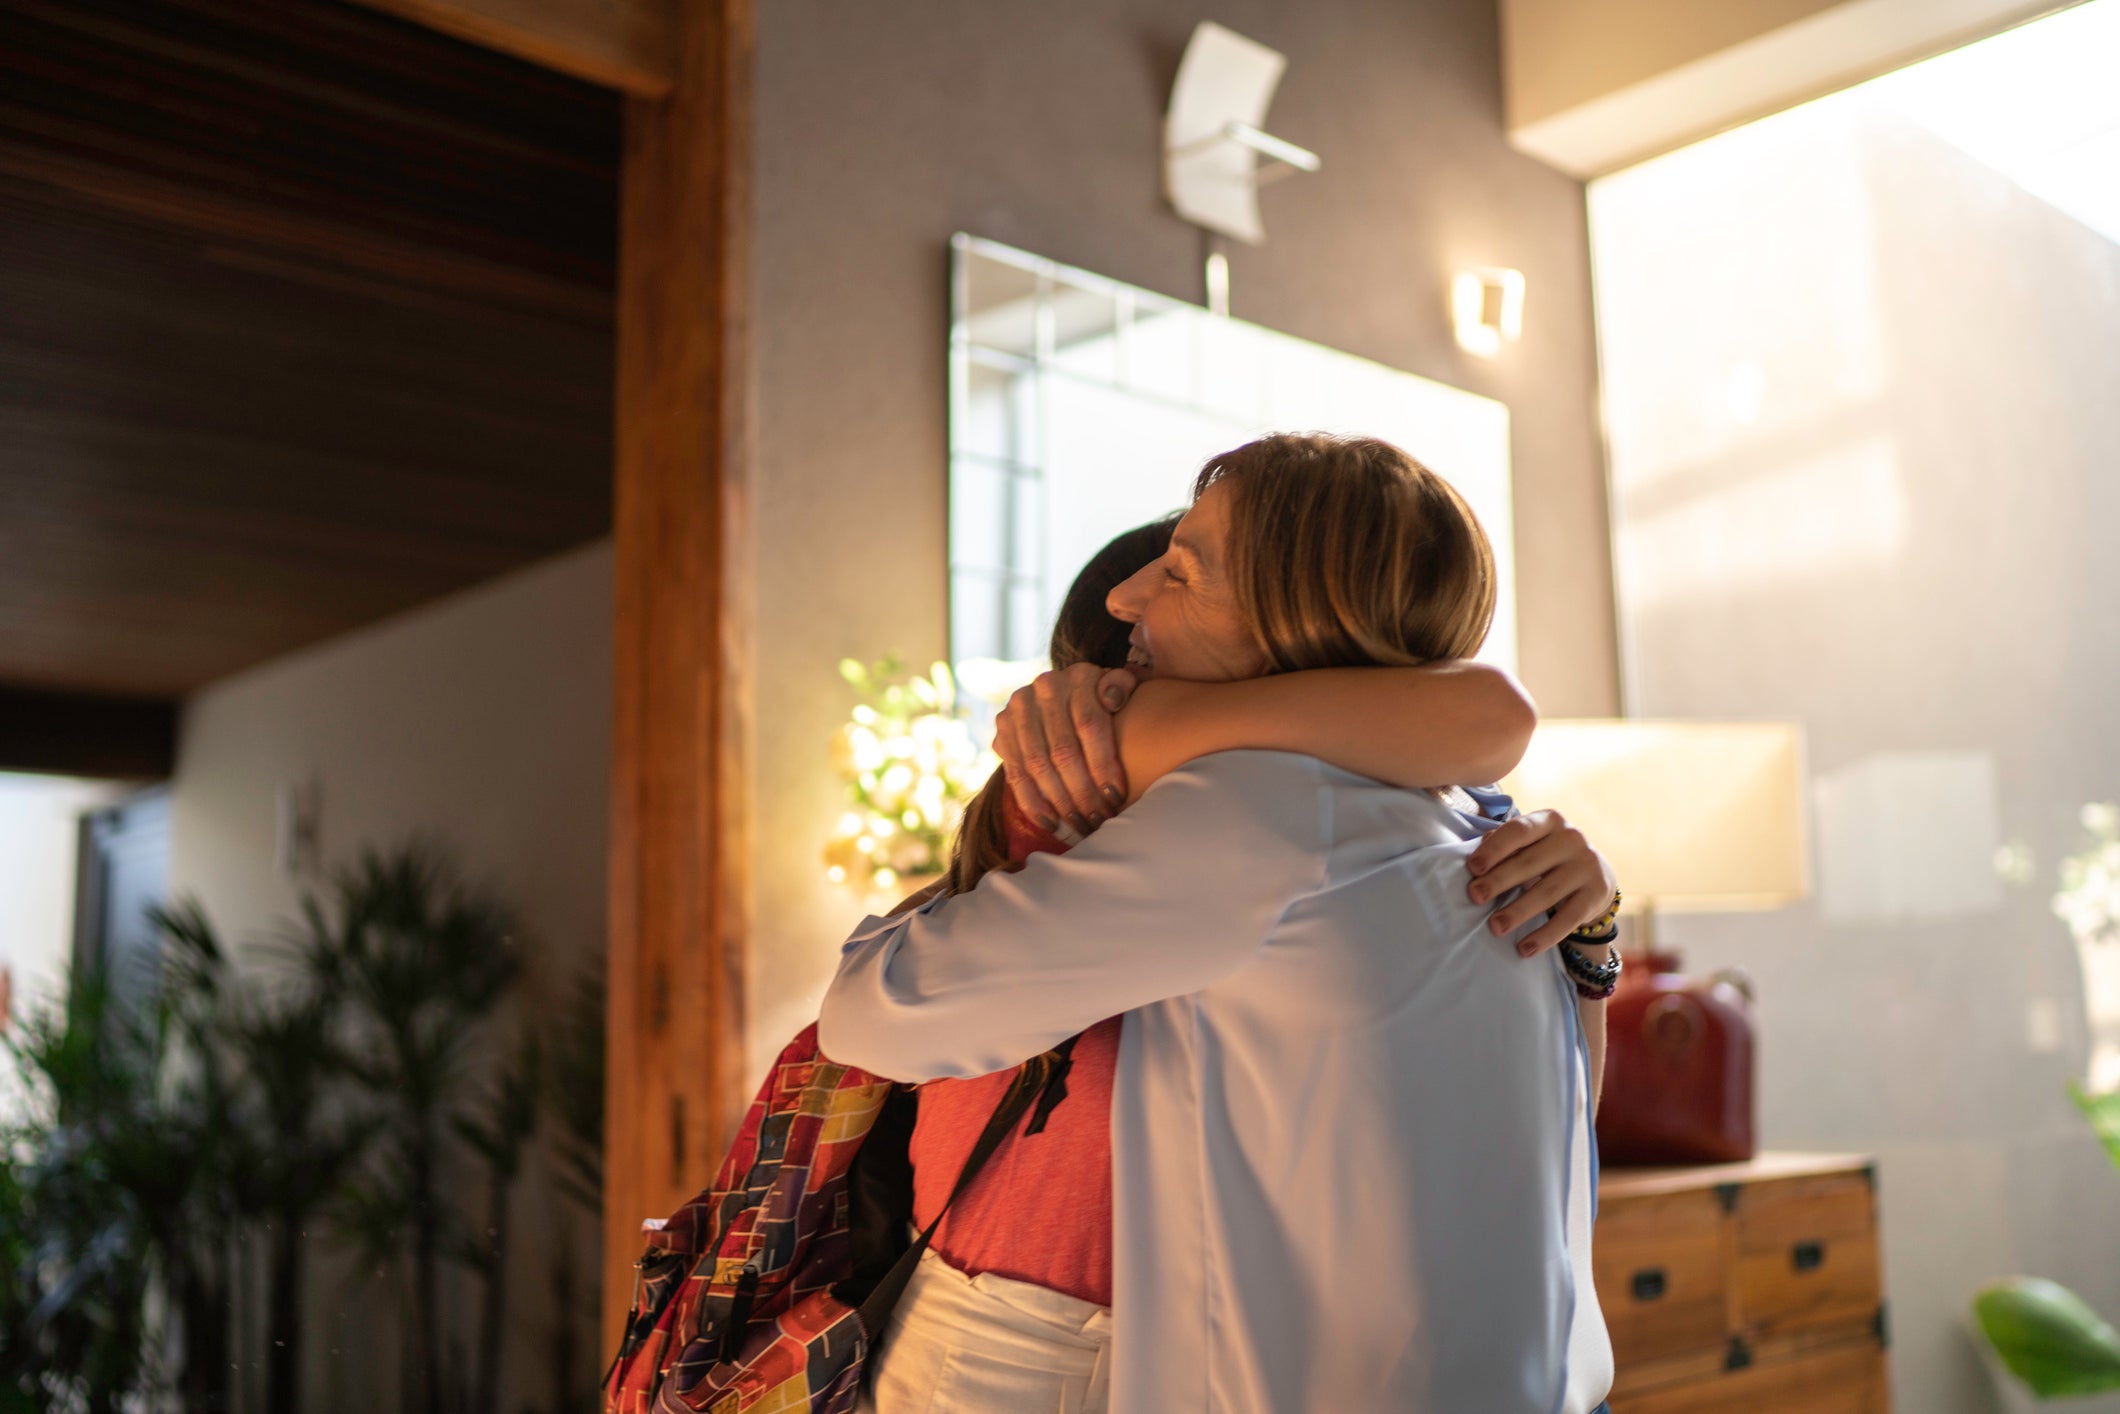 People can resume close contact with friends and family, including hugging